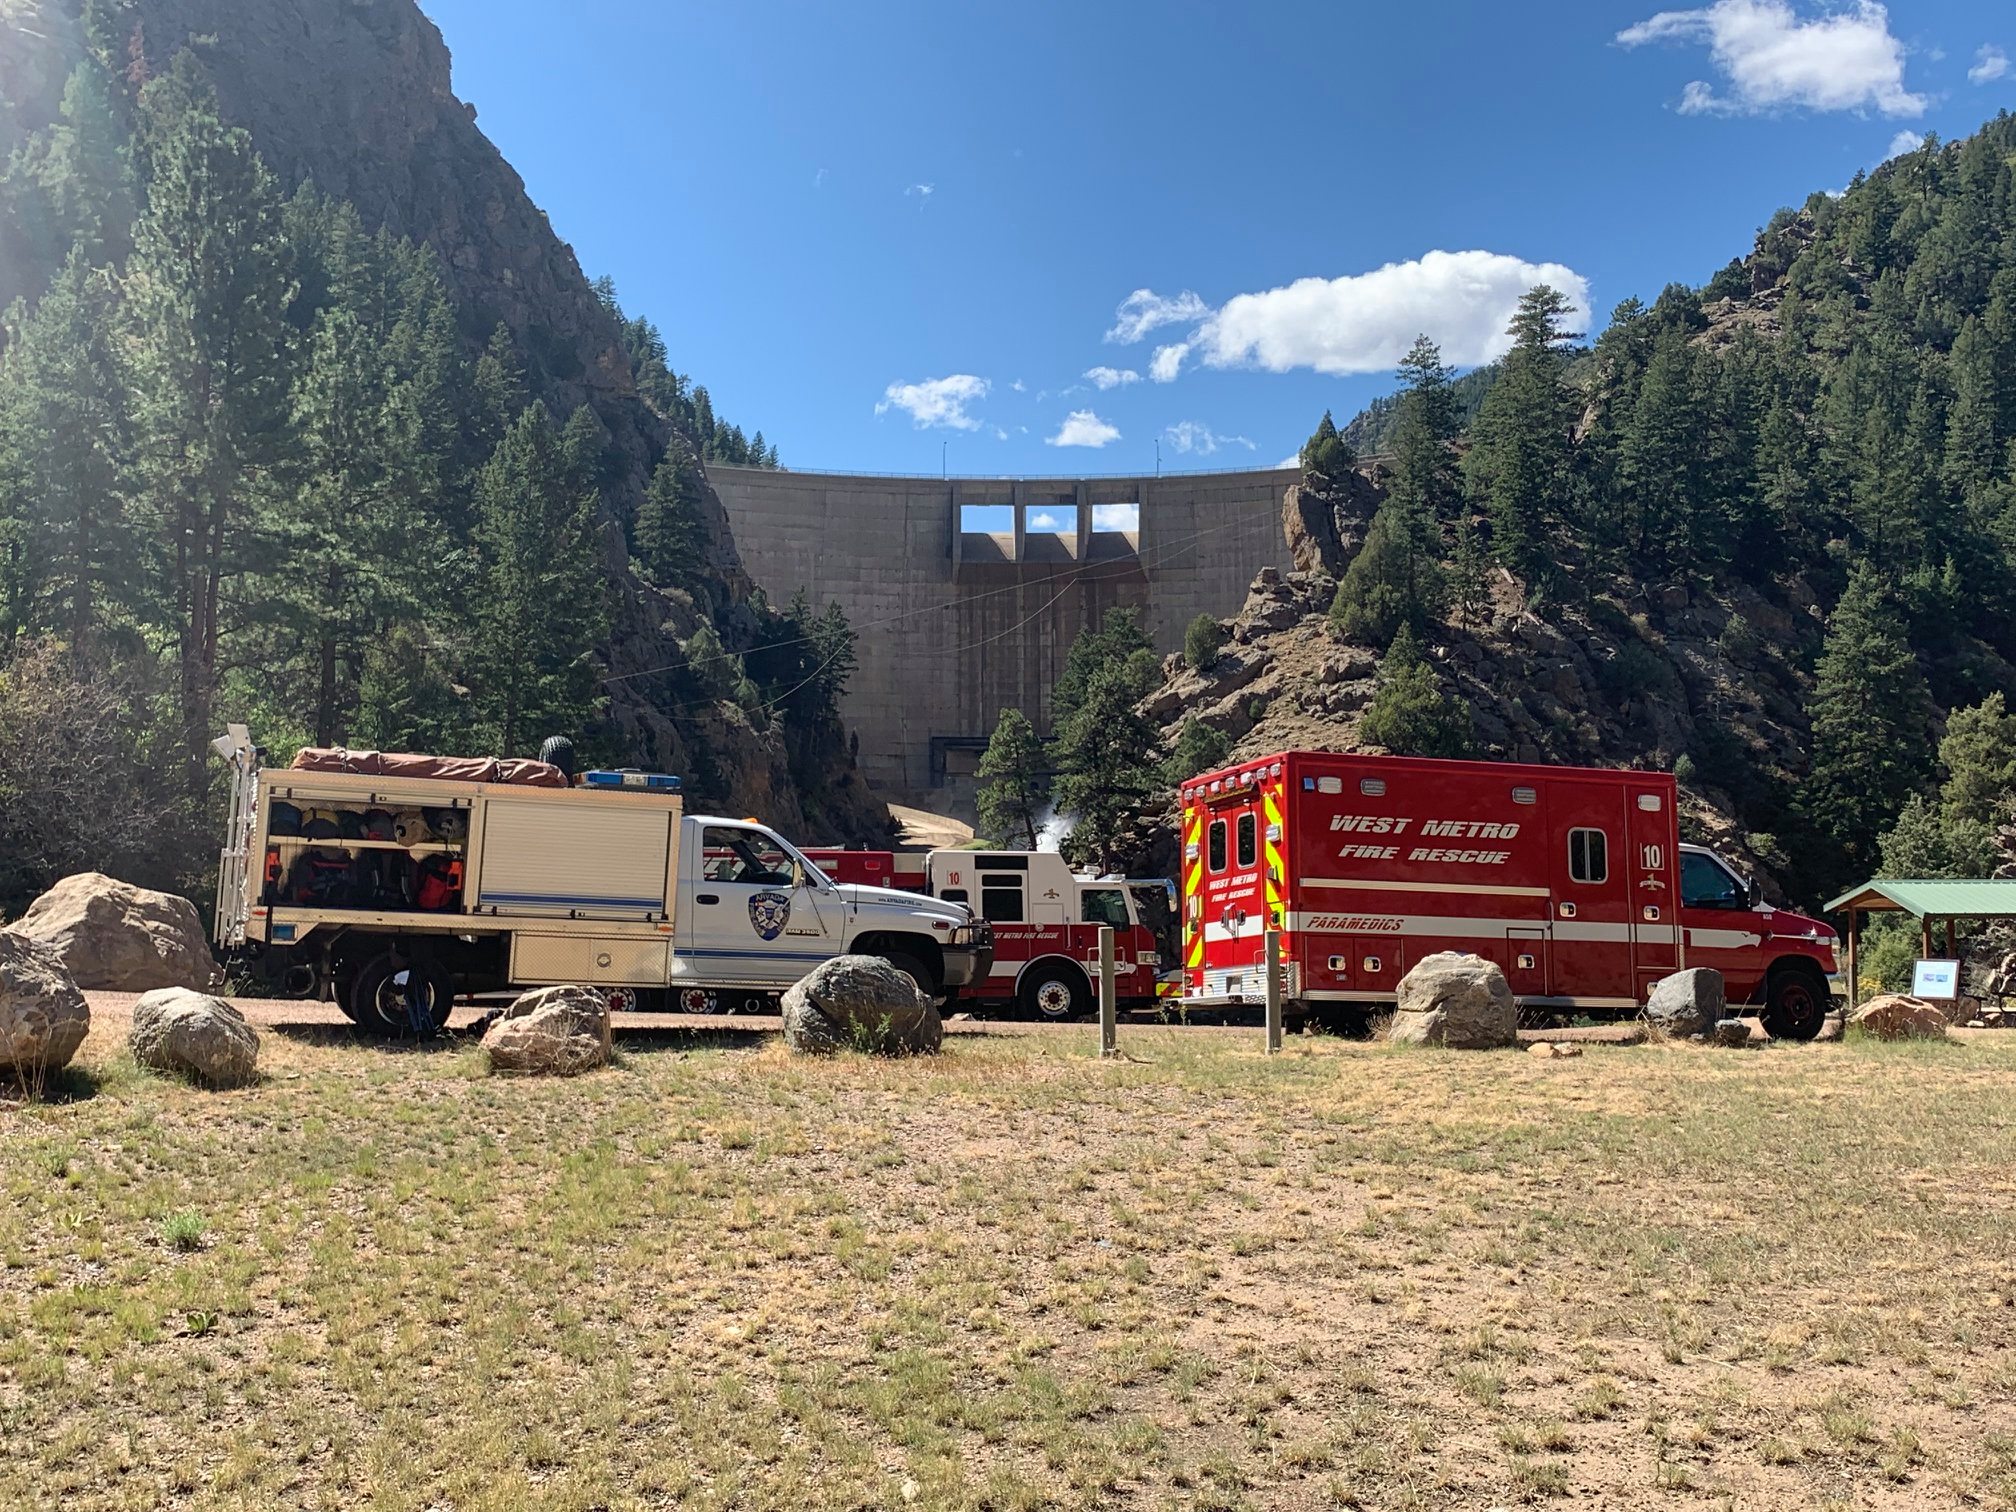 West Metro Fire Rescue stagges at the base of Strontia Springs Dam before a rope rescue training exercise in Waterton Canyon. Photo credit: Joe Orgill.